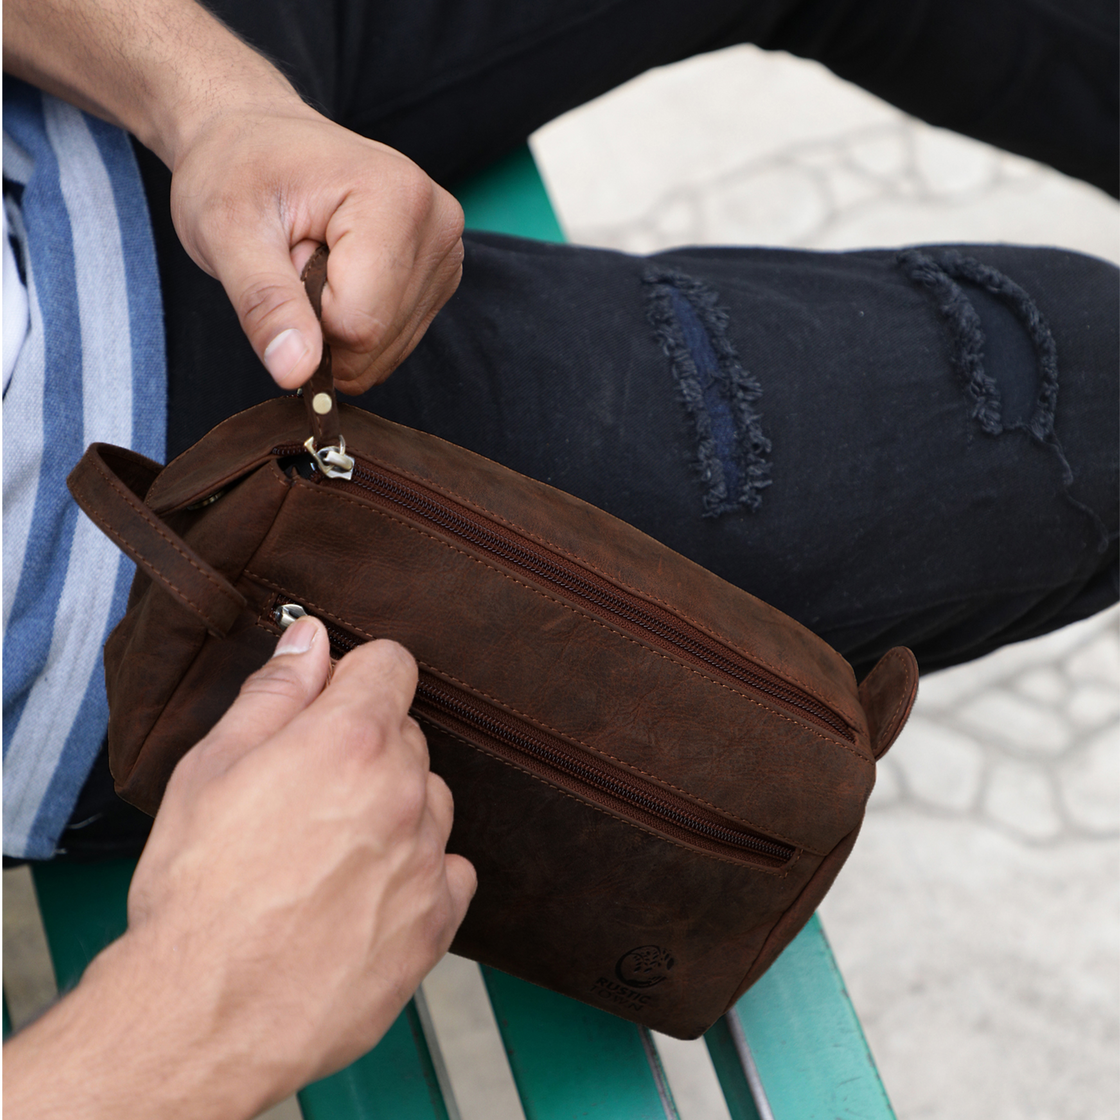 Rustic Town Men's Leather Hand Pouch